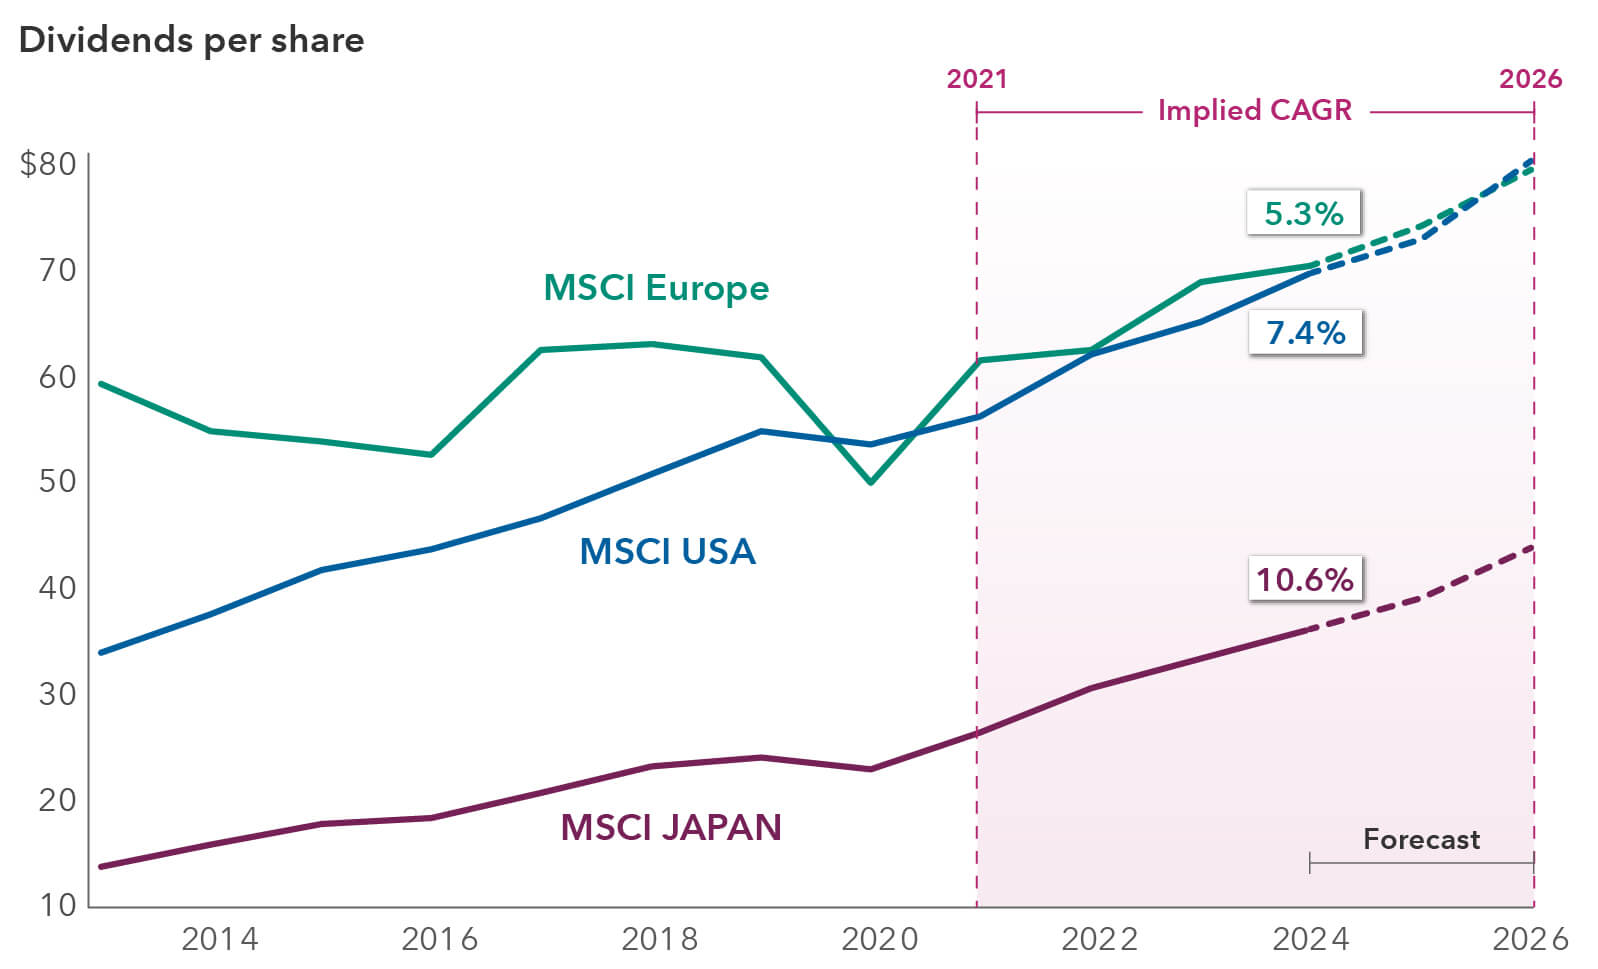 The line chart illustrates the projected growth rates of dividends per share for three stock market indices: MSCI Europe, MSCI USA and MSCI Japan. The x-axis lists the years from 2013 to 2026, with 2024 through 2026 based on consensus estimates. The y-axis shows dividends per share in dollars. From 2021 to 2026, the chart shows implied compound annual growth rates (CAGR). For the top line on the chart, MSCI Europe has a CAGR of 5.3%. MSCI USA’s CAGR is 7.4%, and MSCI Japan’s is 10.6%. All three lines have increasing dividend trends during the specified period. 